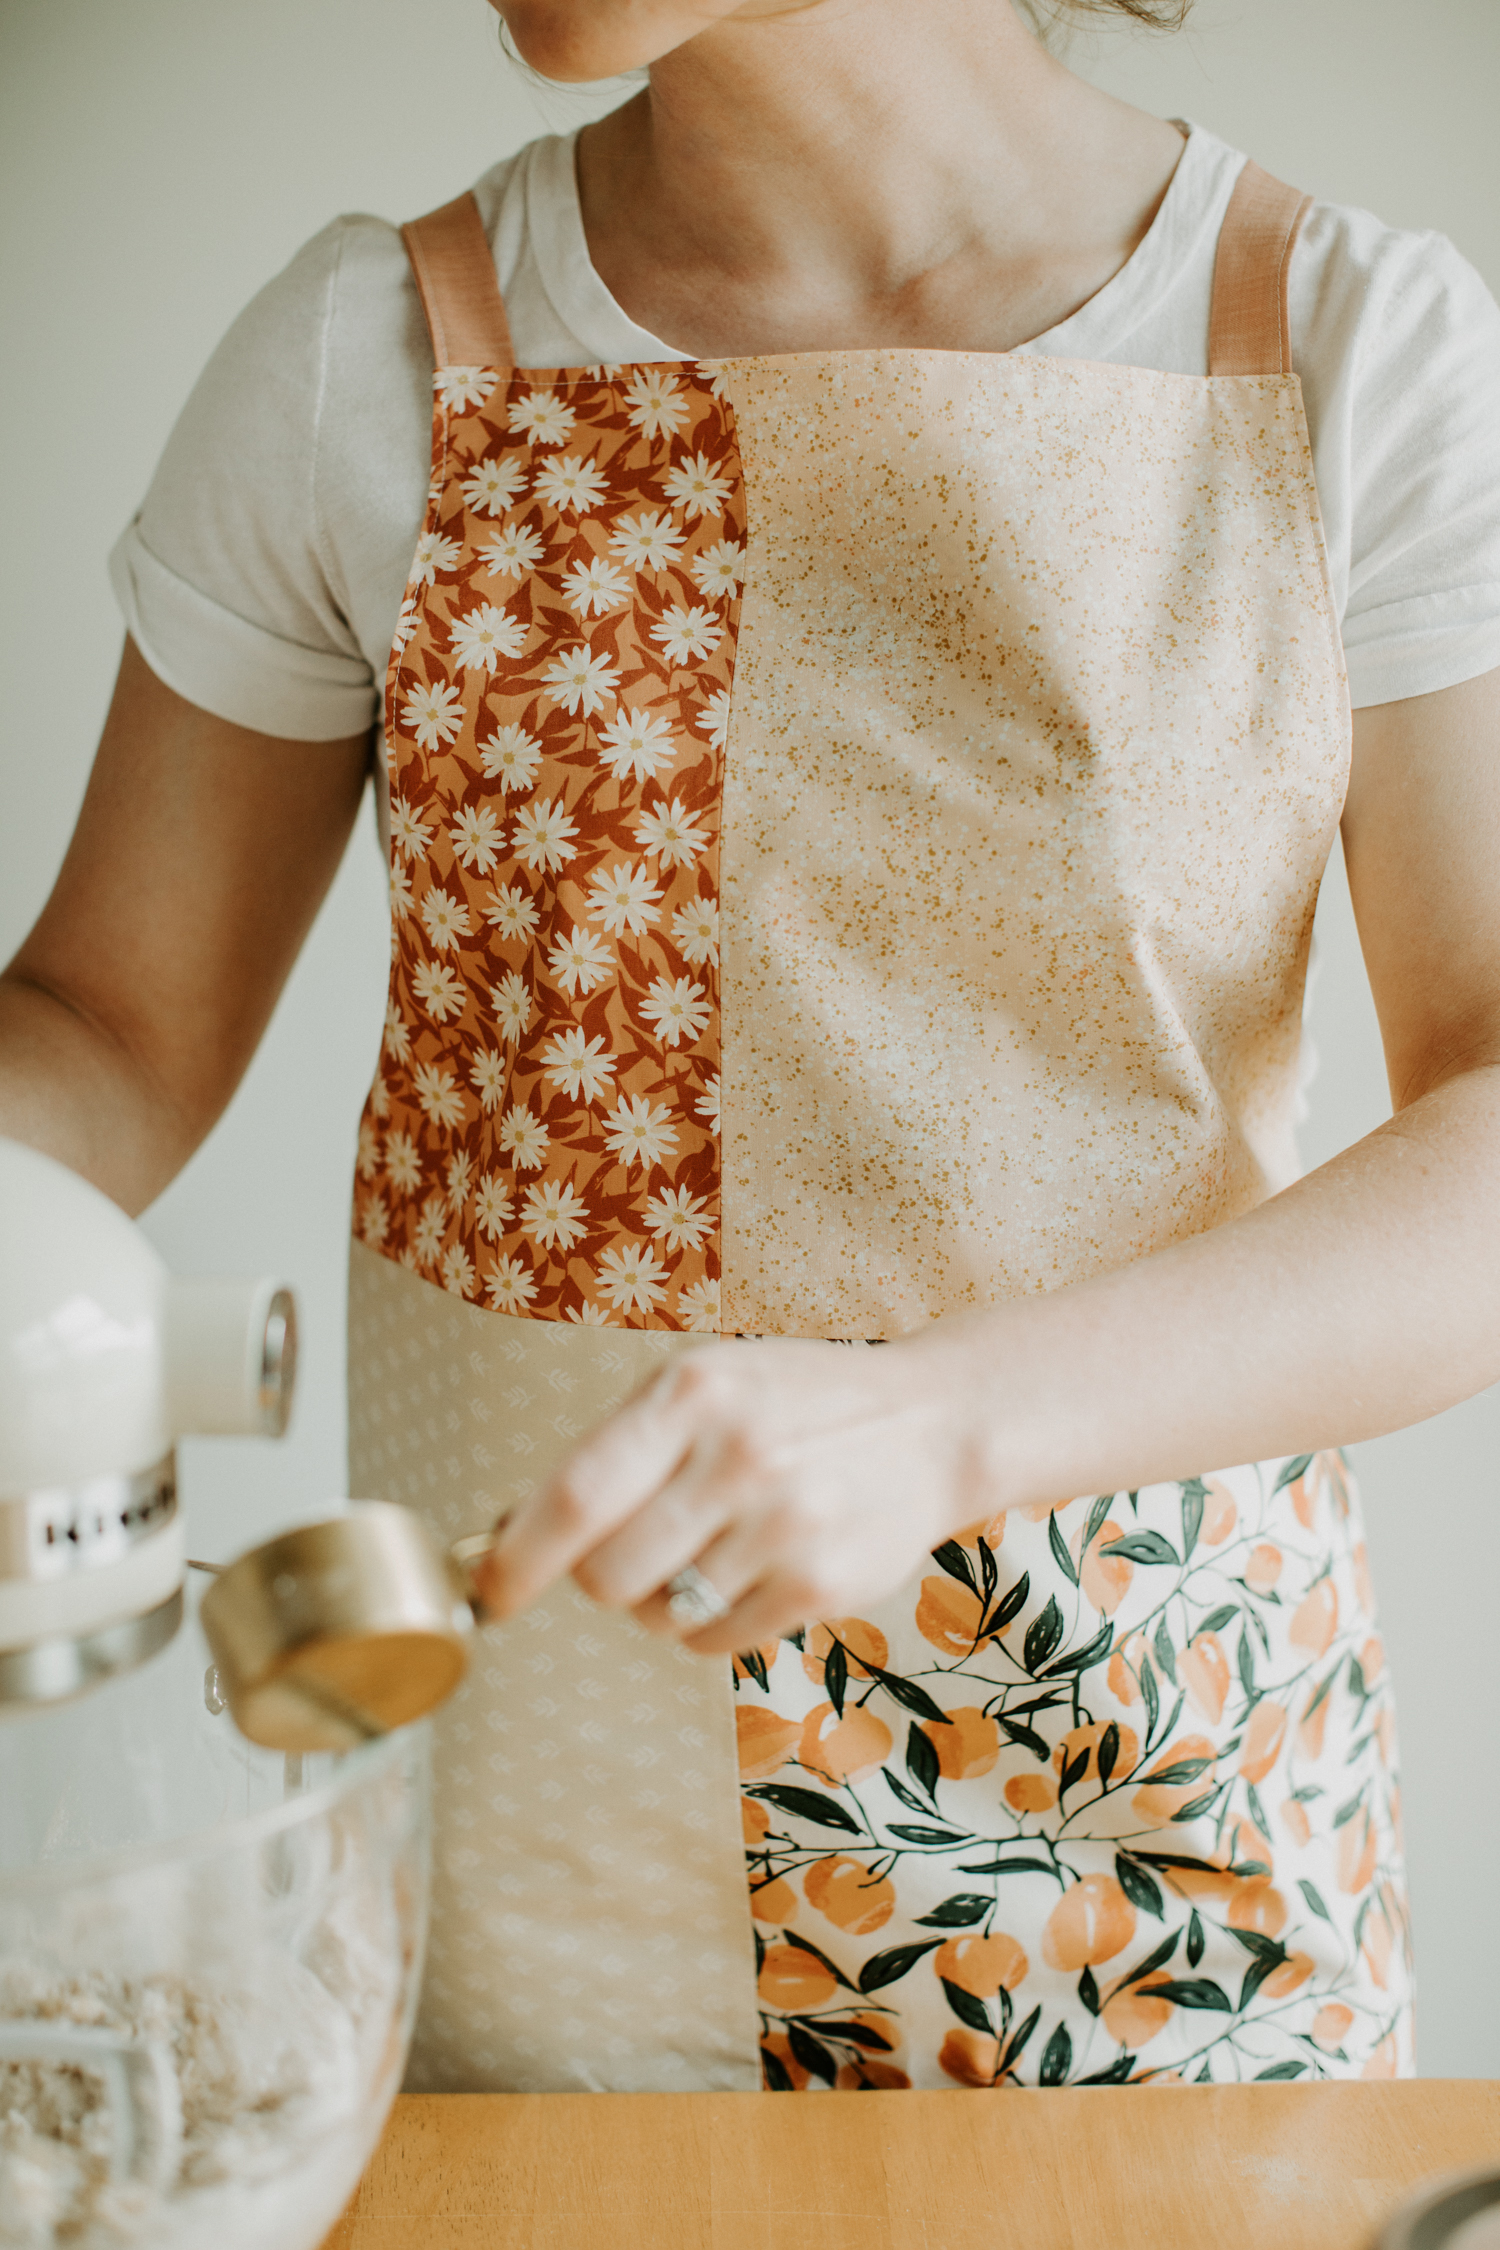 This modern patchwork apron tutorial is a fun, quick project for any sewing skill level!